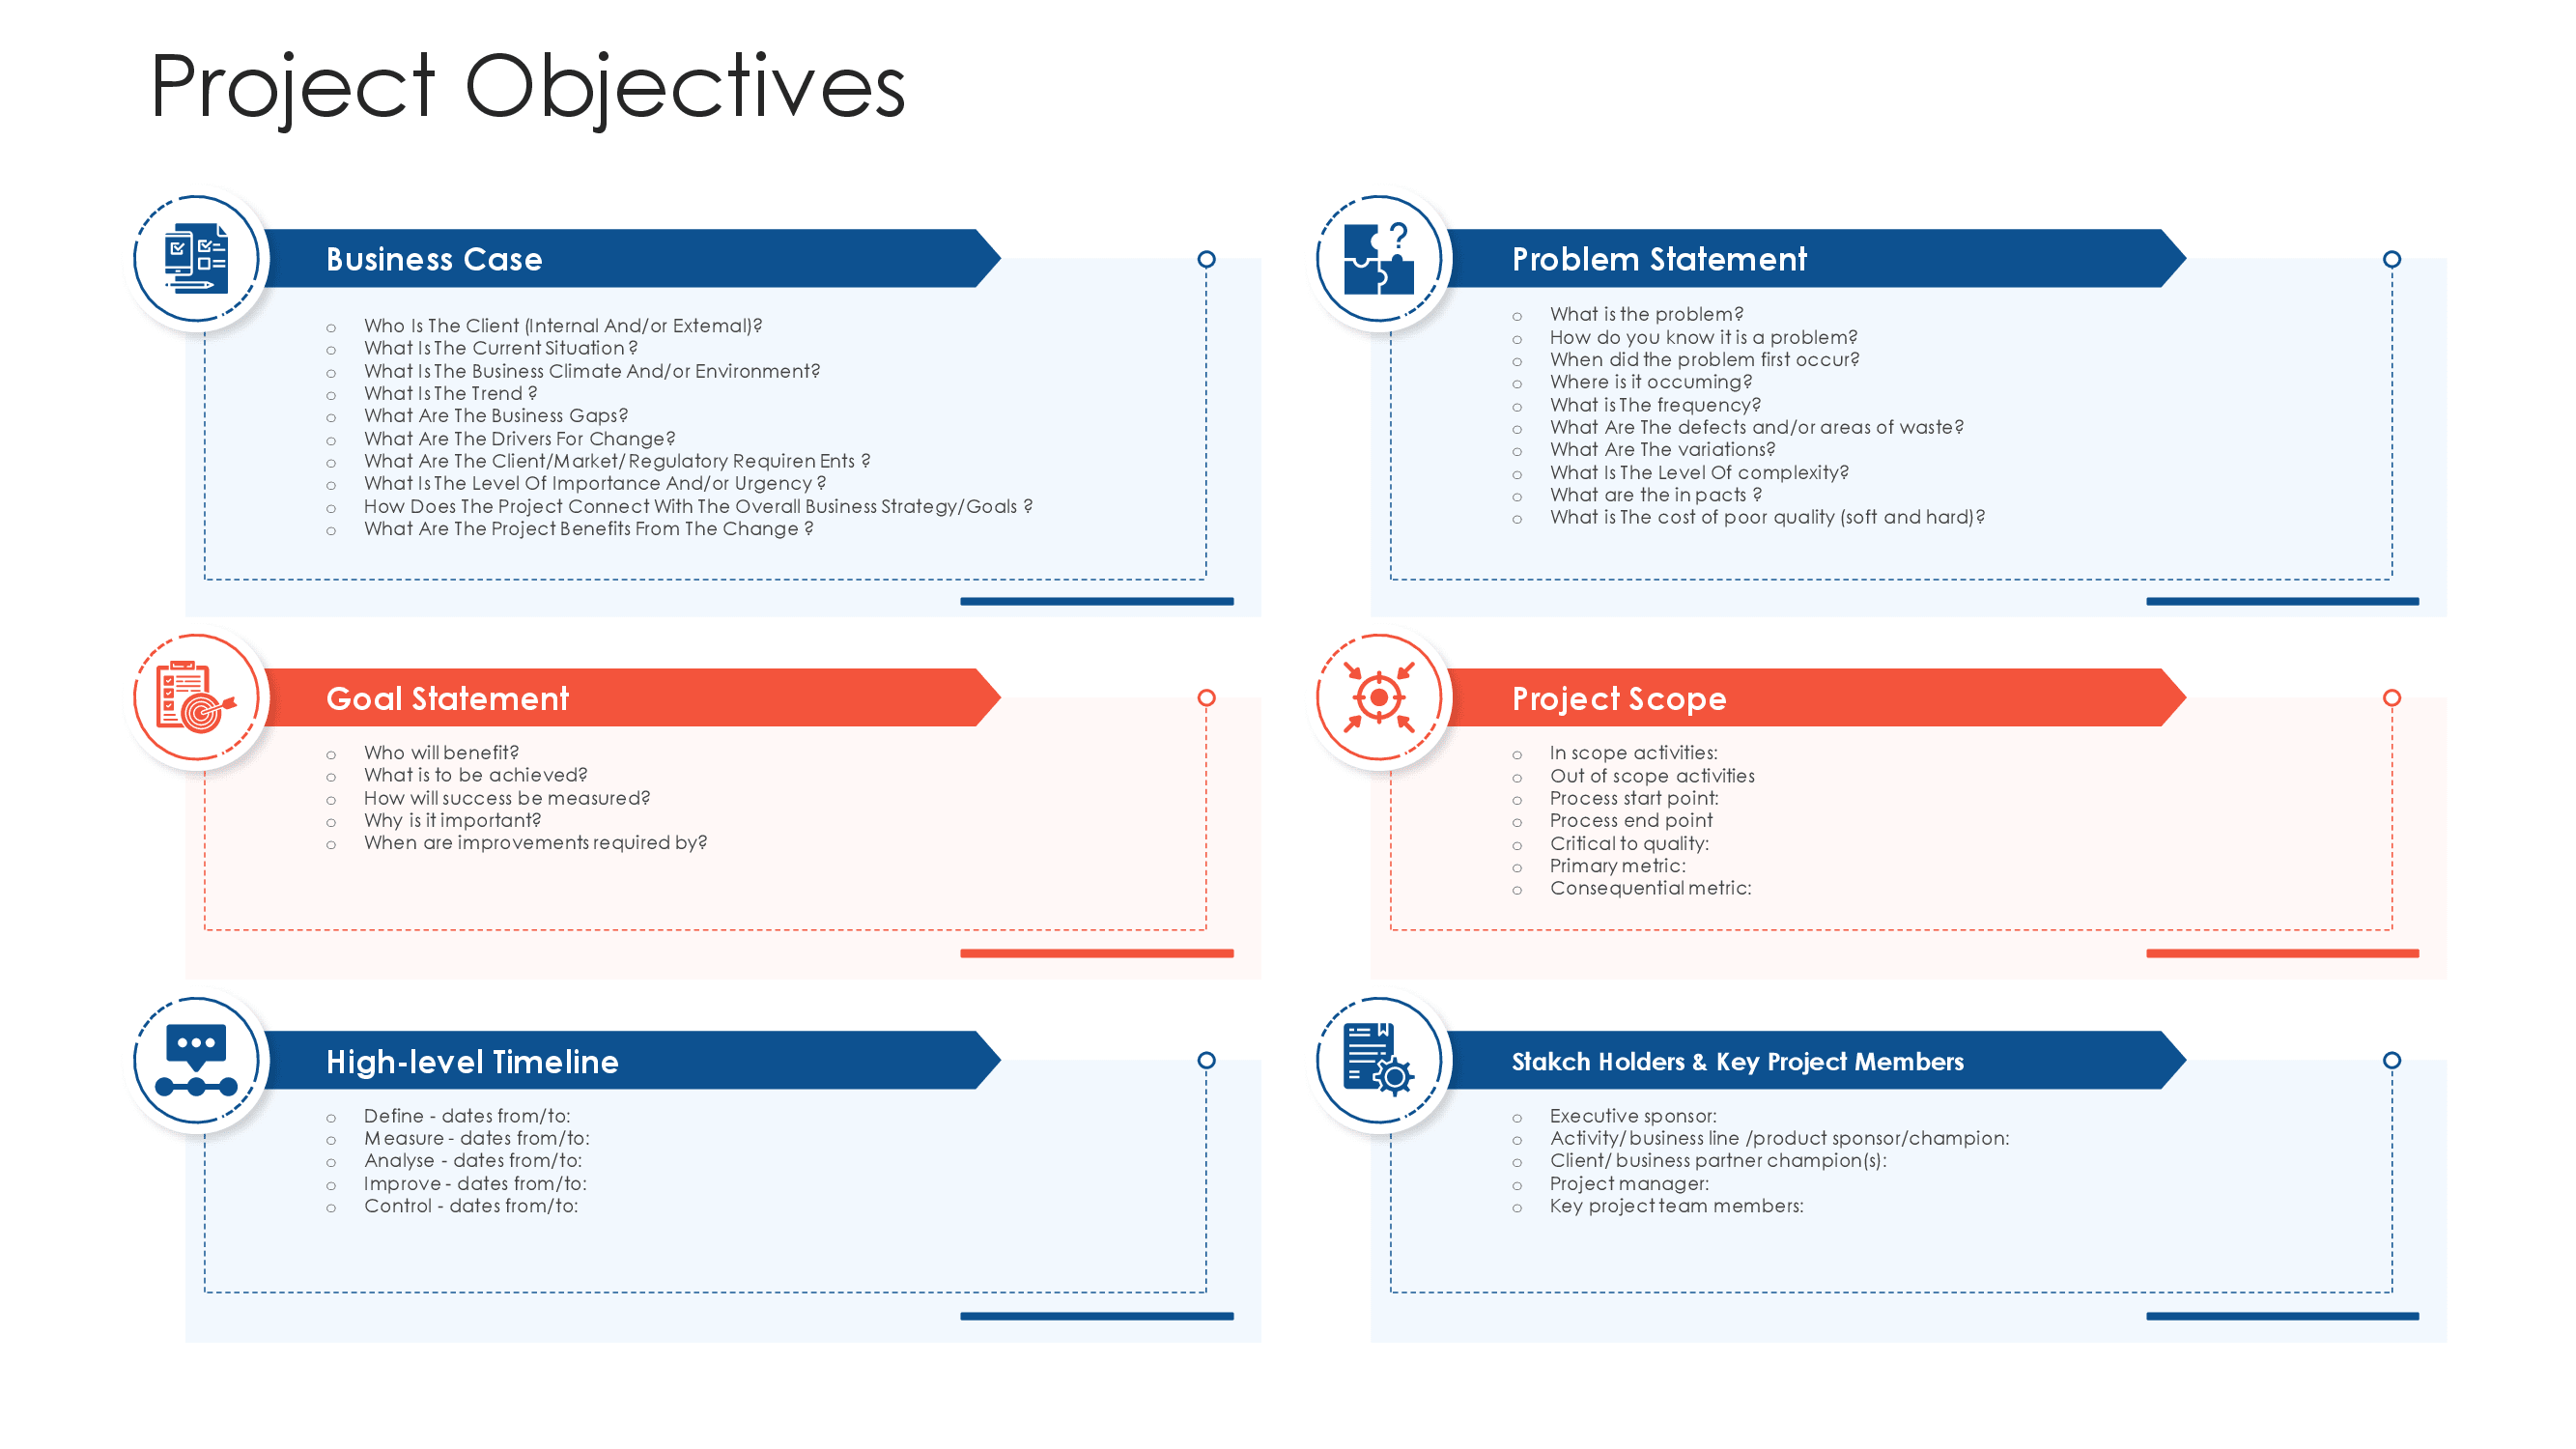 Project objectives